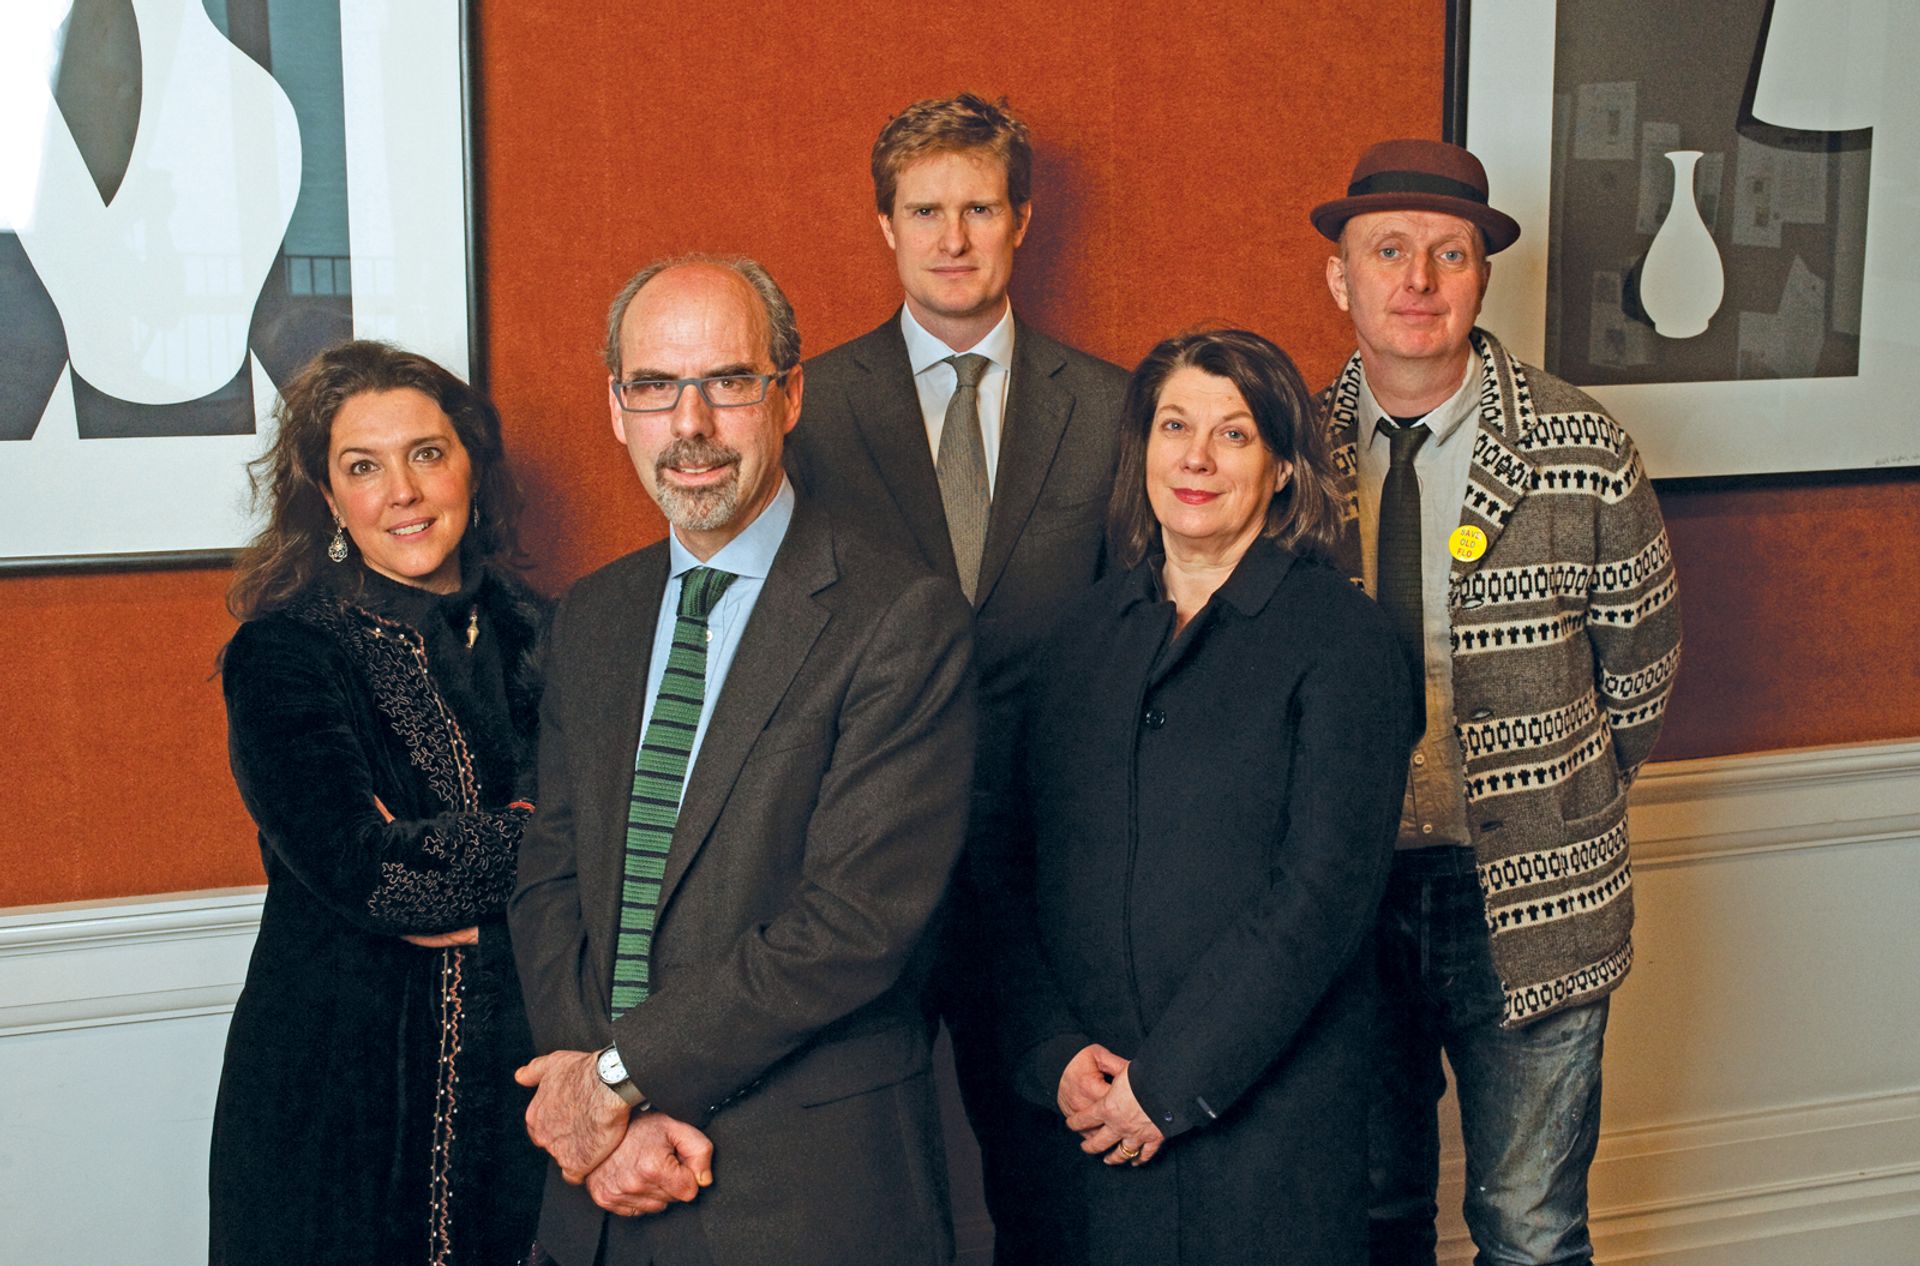 The 2013 Museum of the Year judges (Bettany Hughes, Stephen Deuchar, Tristram Hunt, Sarah Crompton and the artist Bob and Roberta Smith) Mark Crick